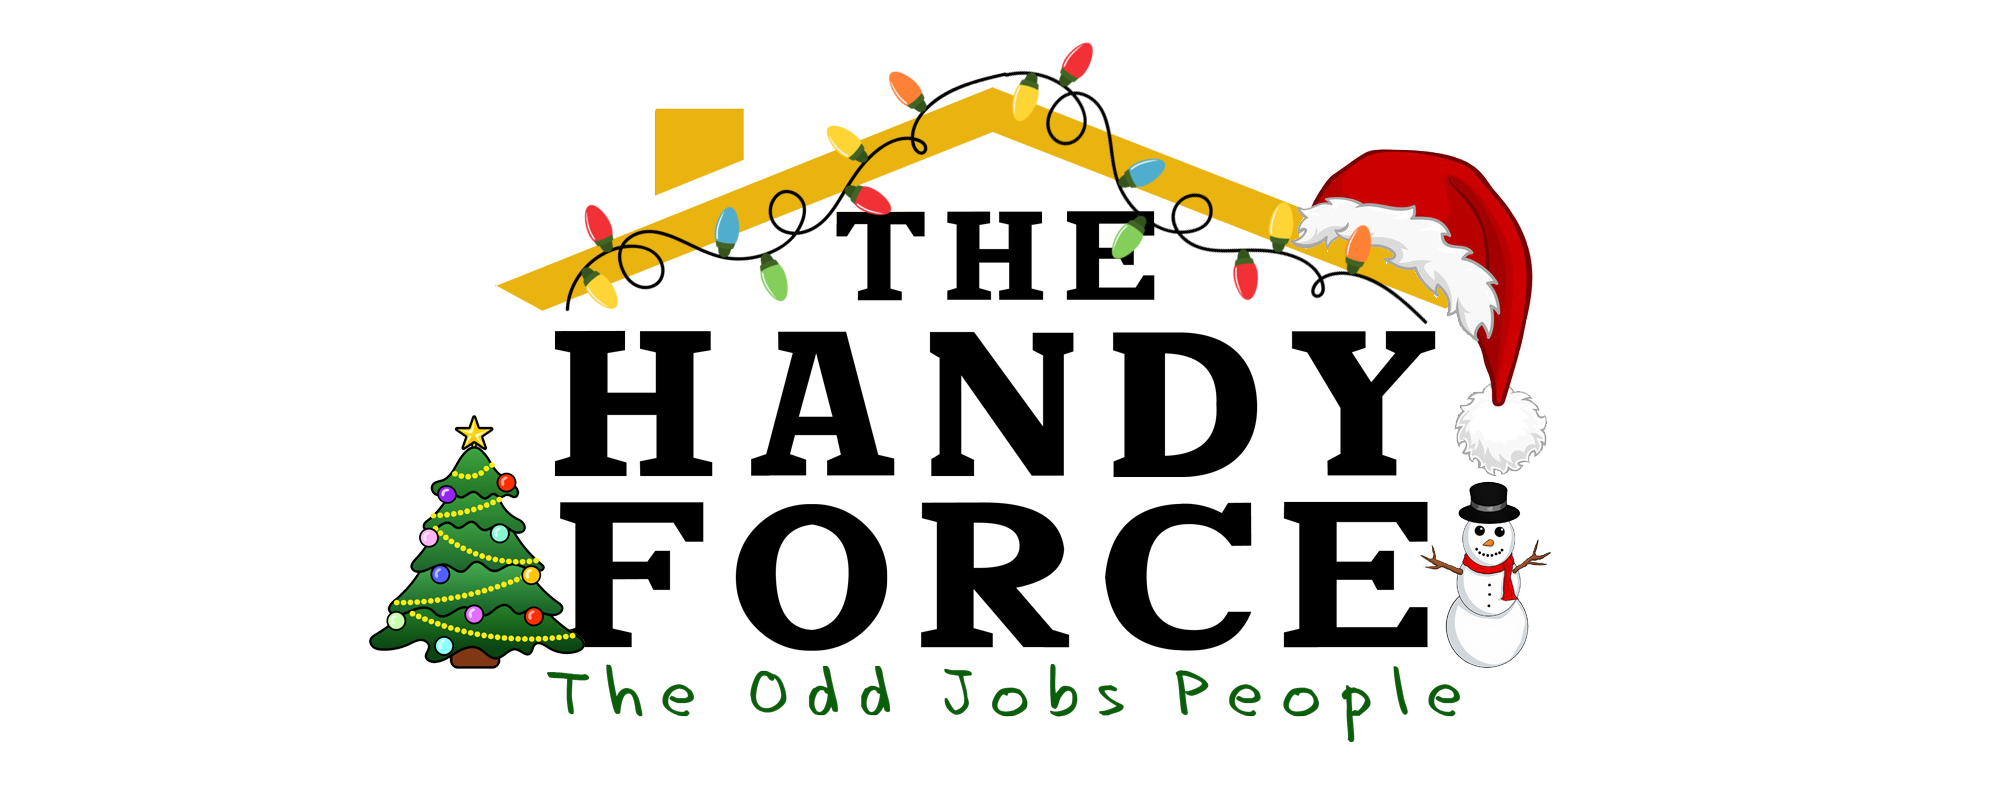 Cheers to a Toolbox Full of Joy: Happy Holidays from The HandyForce!